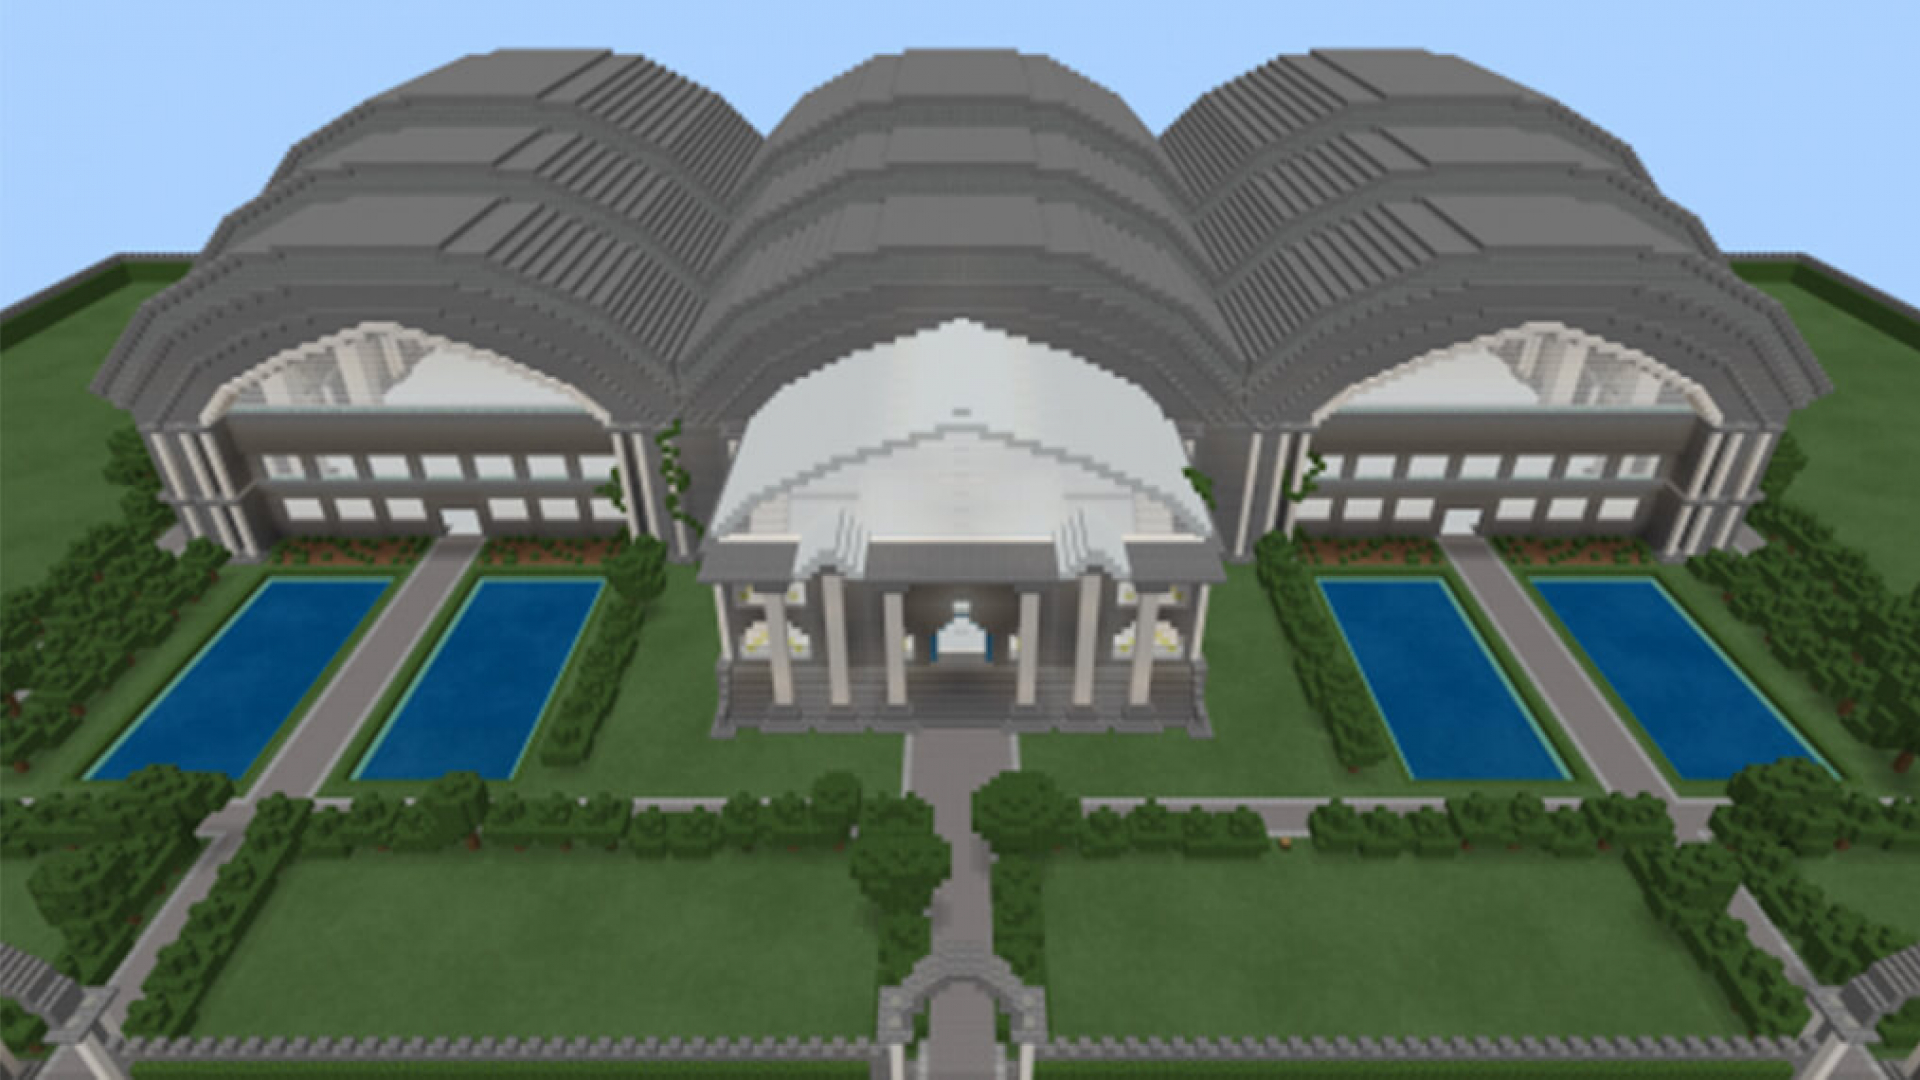 A large museum made of Minecraft blocks.